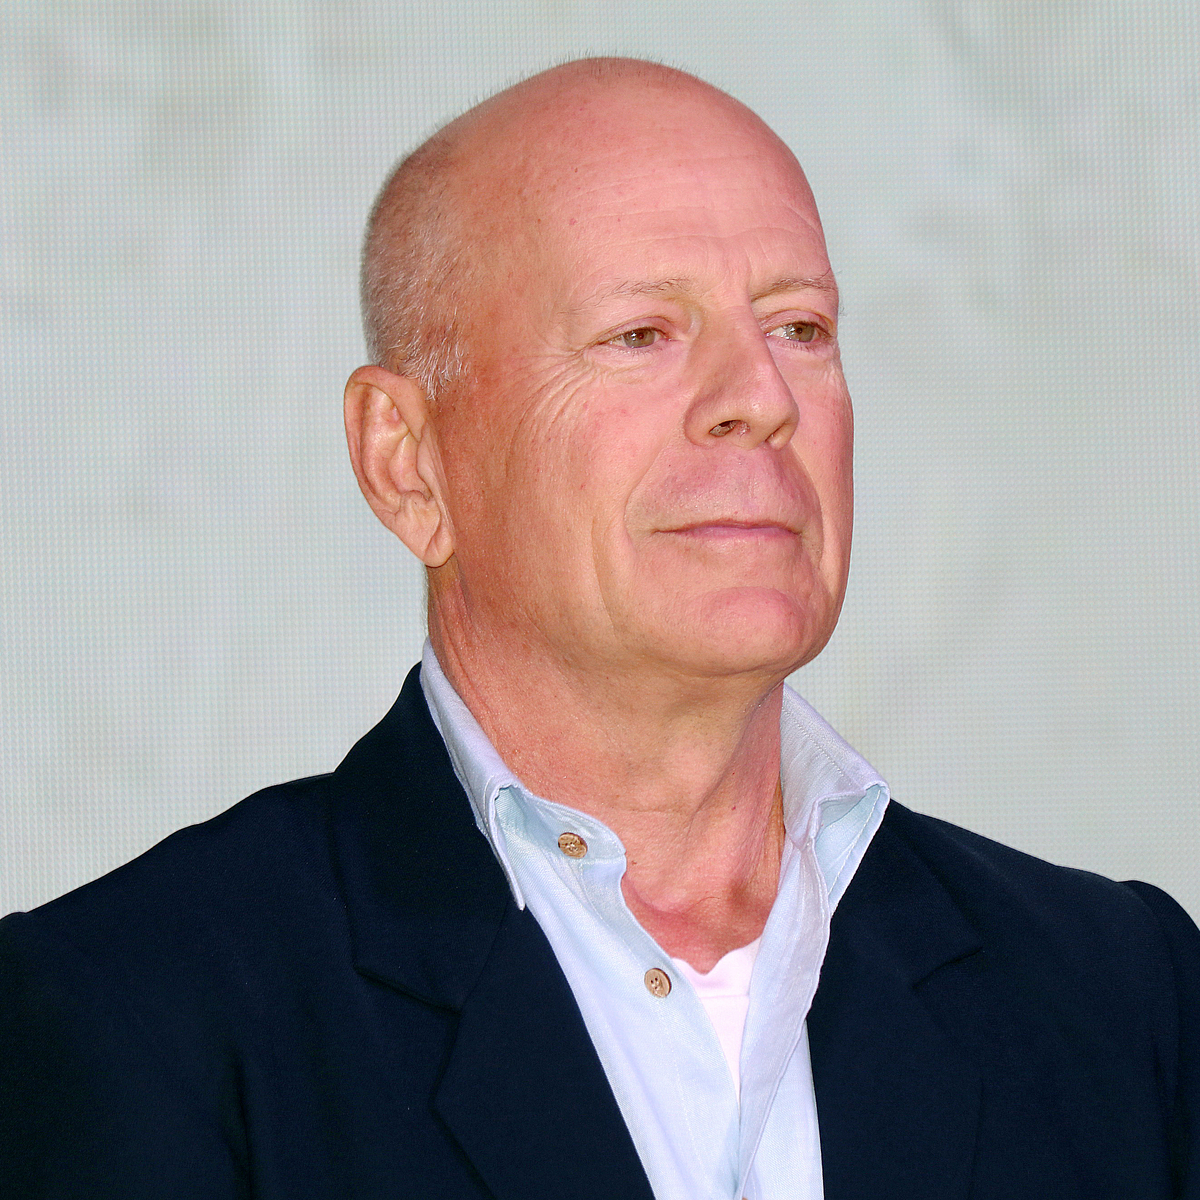 Bruce Willis Is “Not Totally Verbal” Amid Aphasia and Dementia Battle